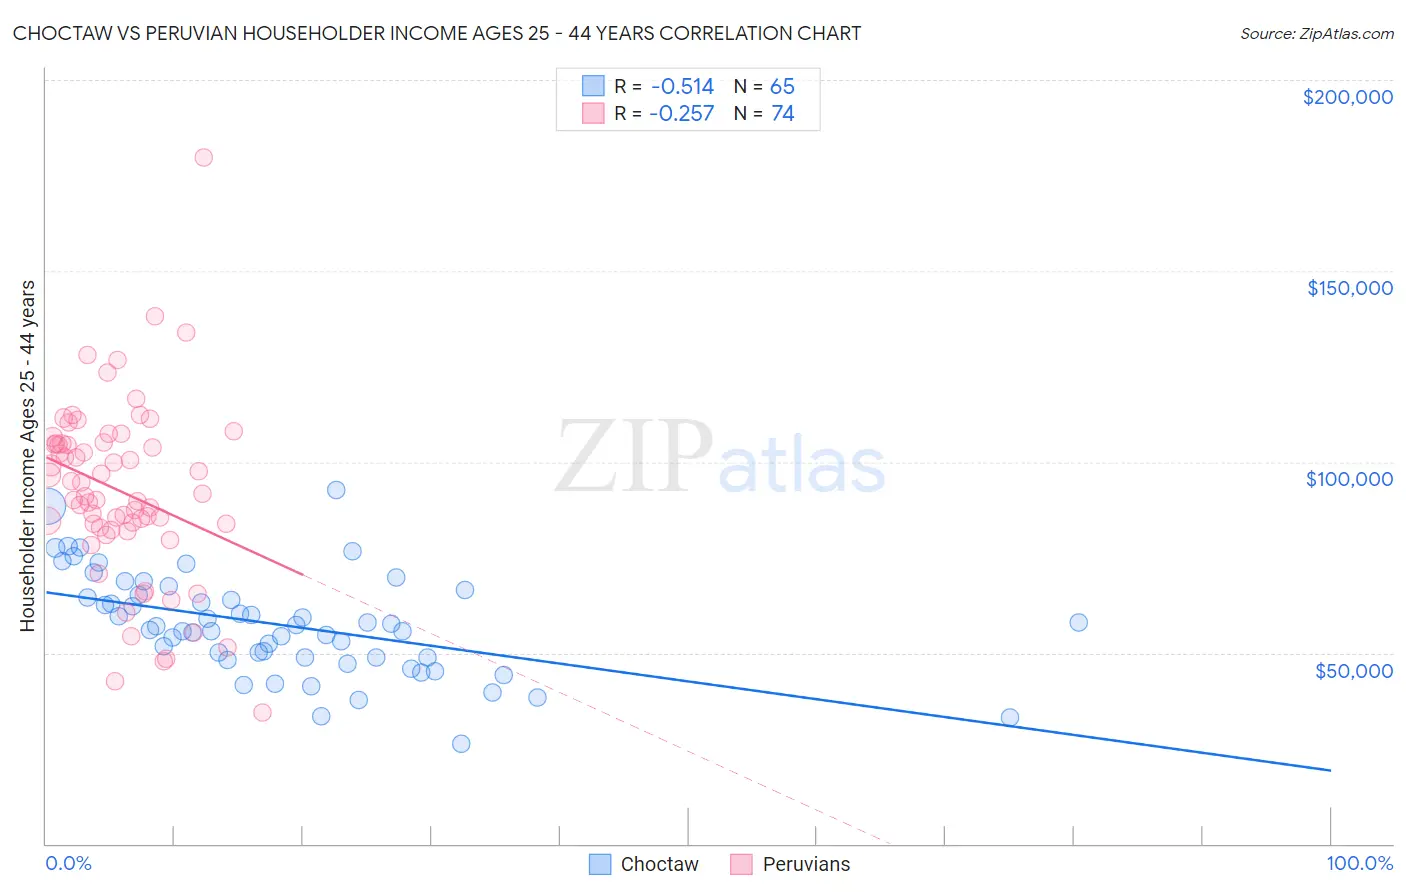 Choctaw vs Peruvian Householder Income Ages 25 - 44 years